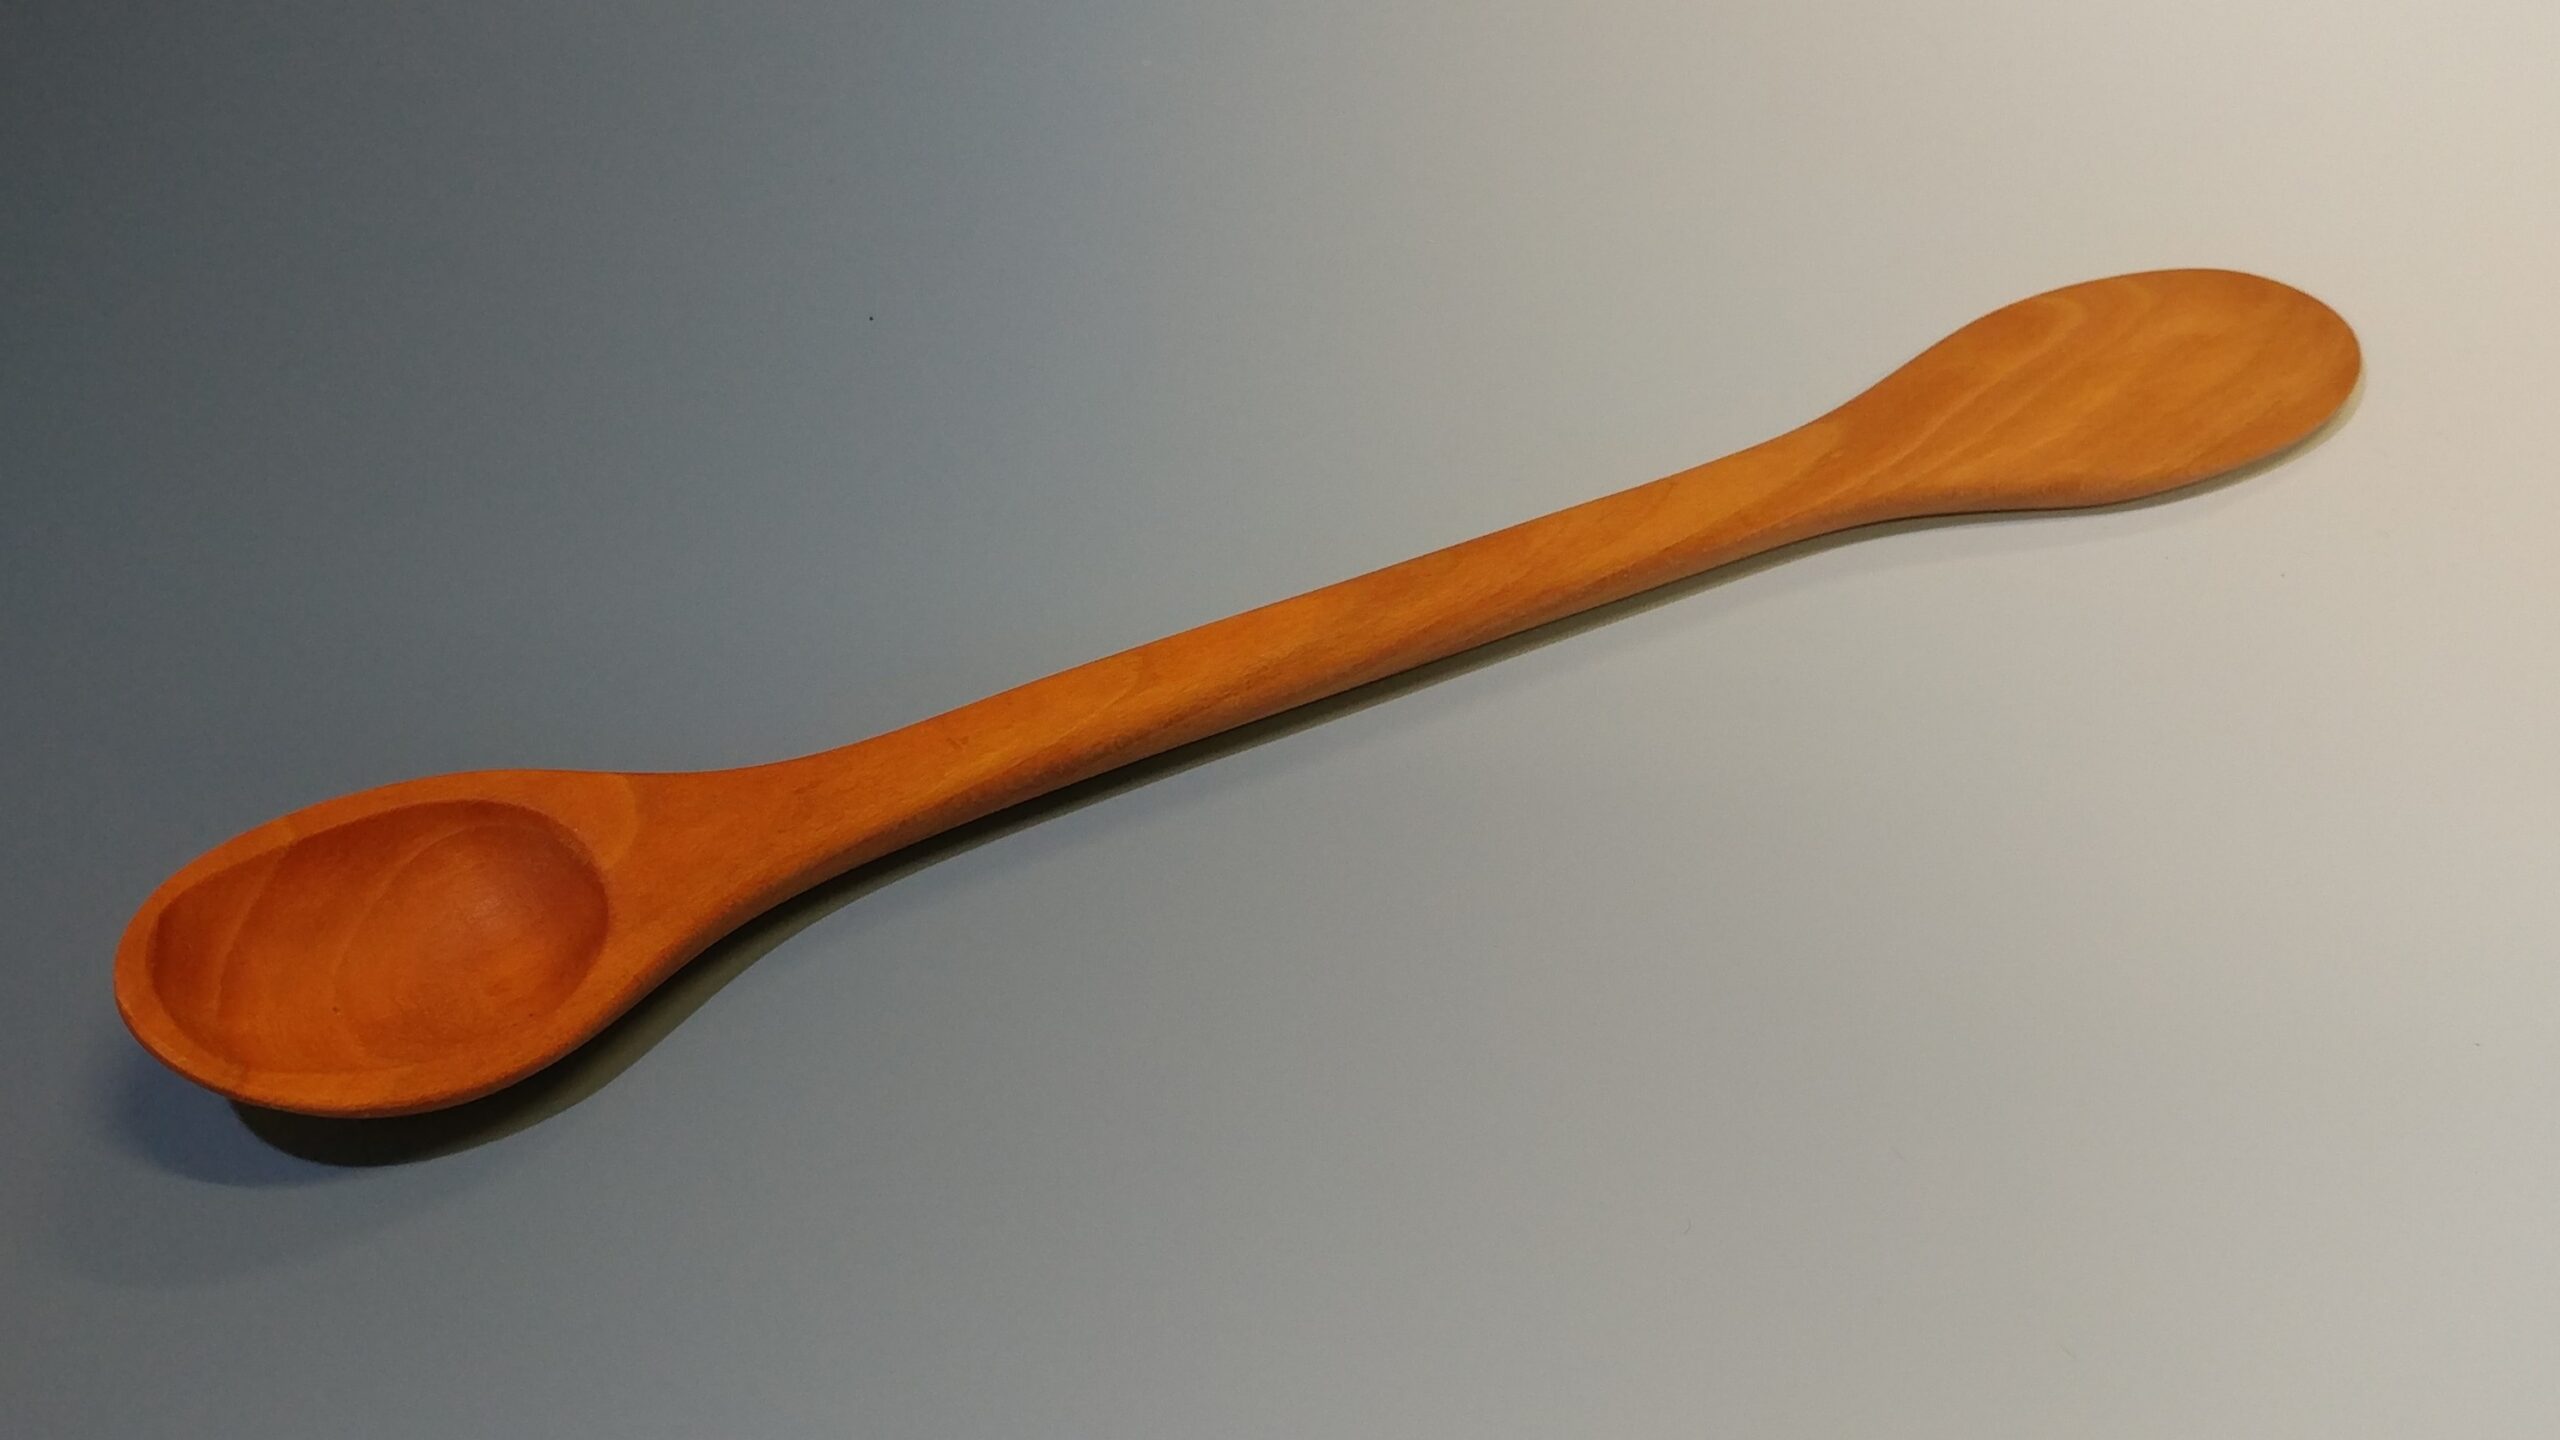 https://alleghenytreenware.com/wp-content/uploads/Peanut-Butter-Spoon-scaled.jpg